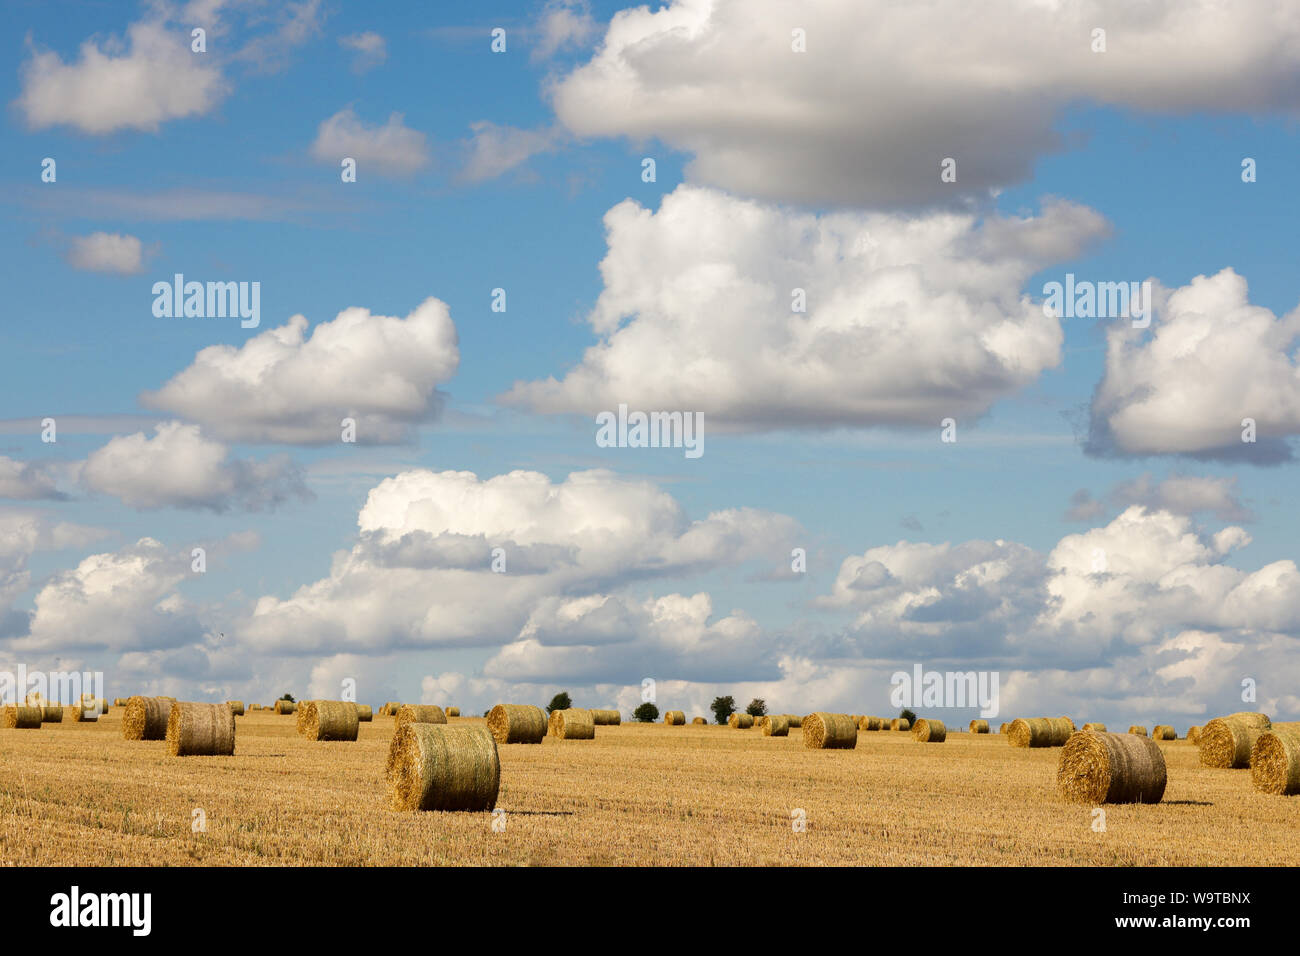 Harvest Time - Hay bales standing in a field on a beautiful summer day with blue skies and clouds Stock Photo